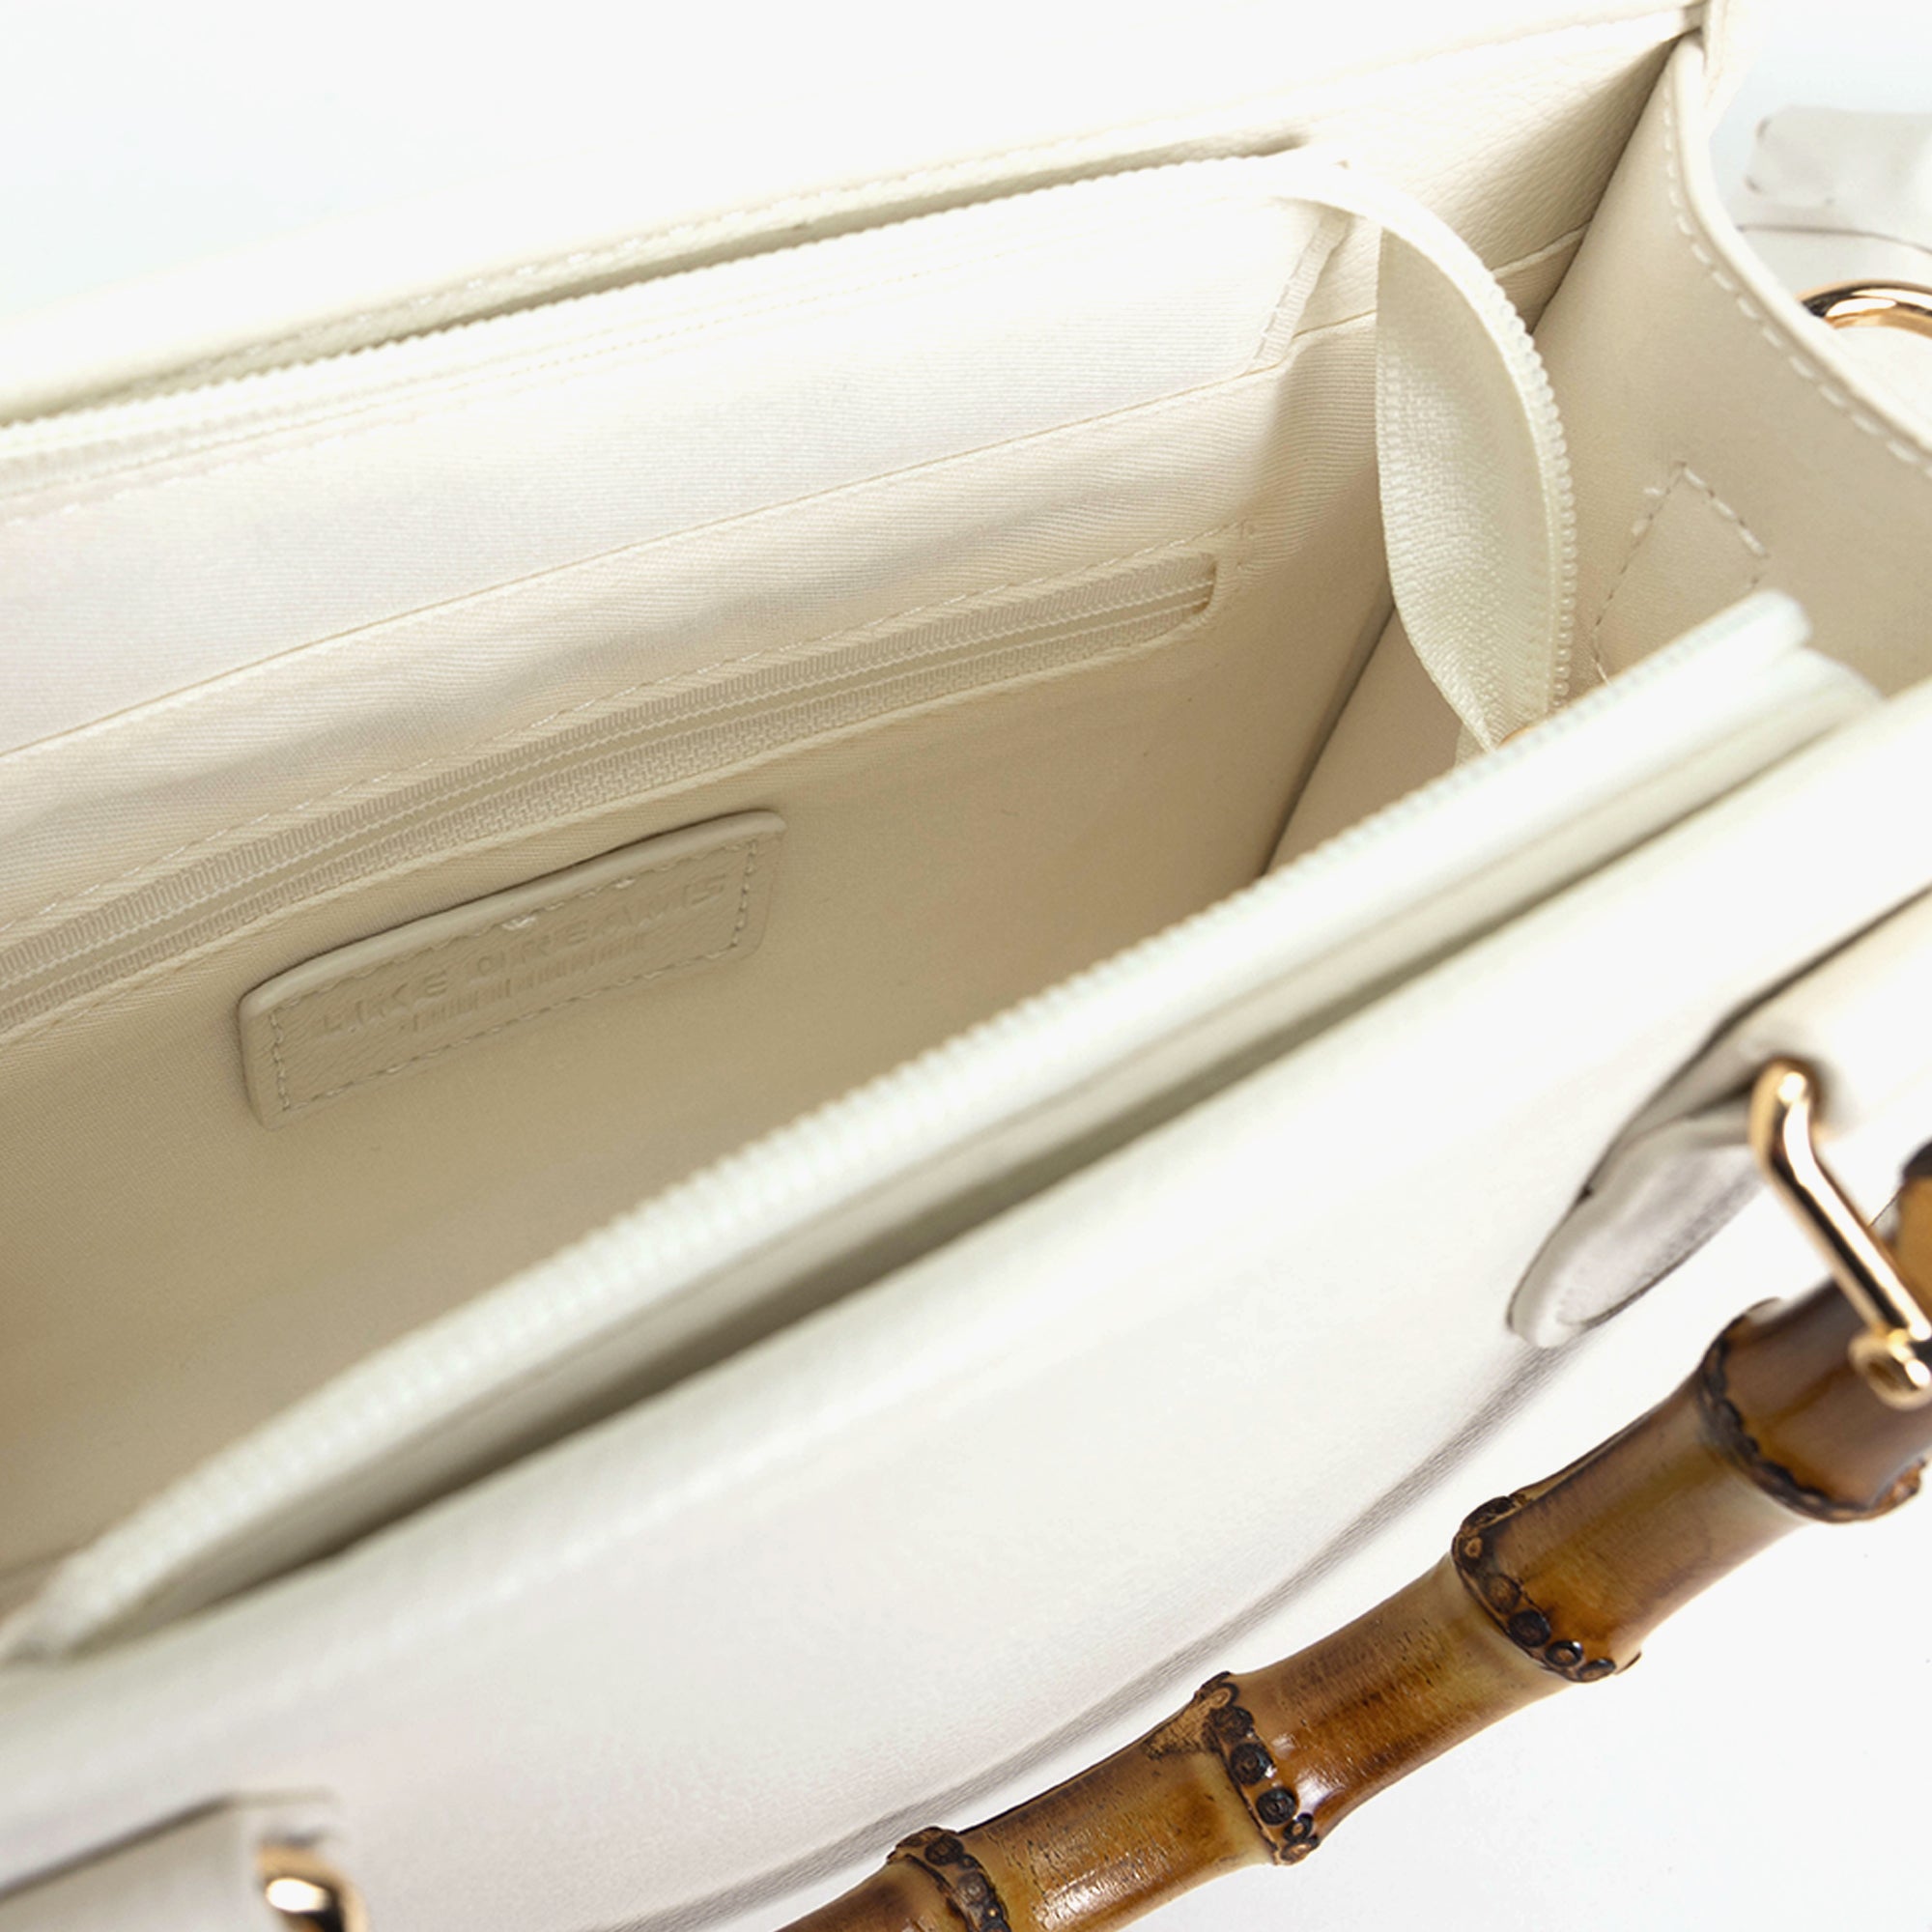 The Kate Wooden Handle Strap Satchel, White